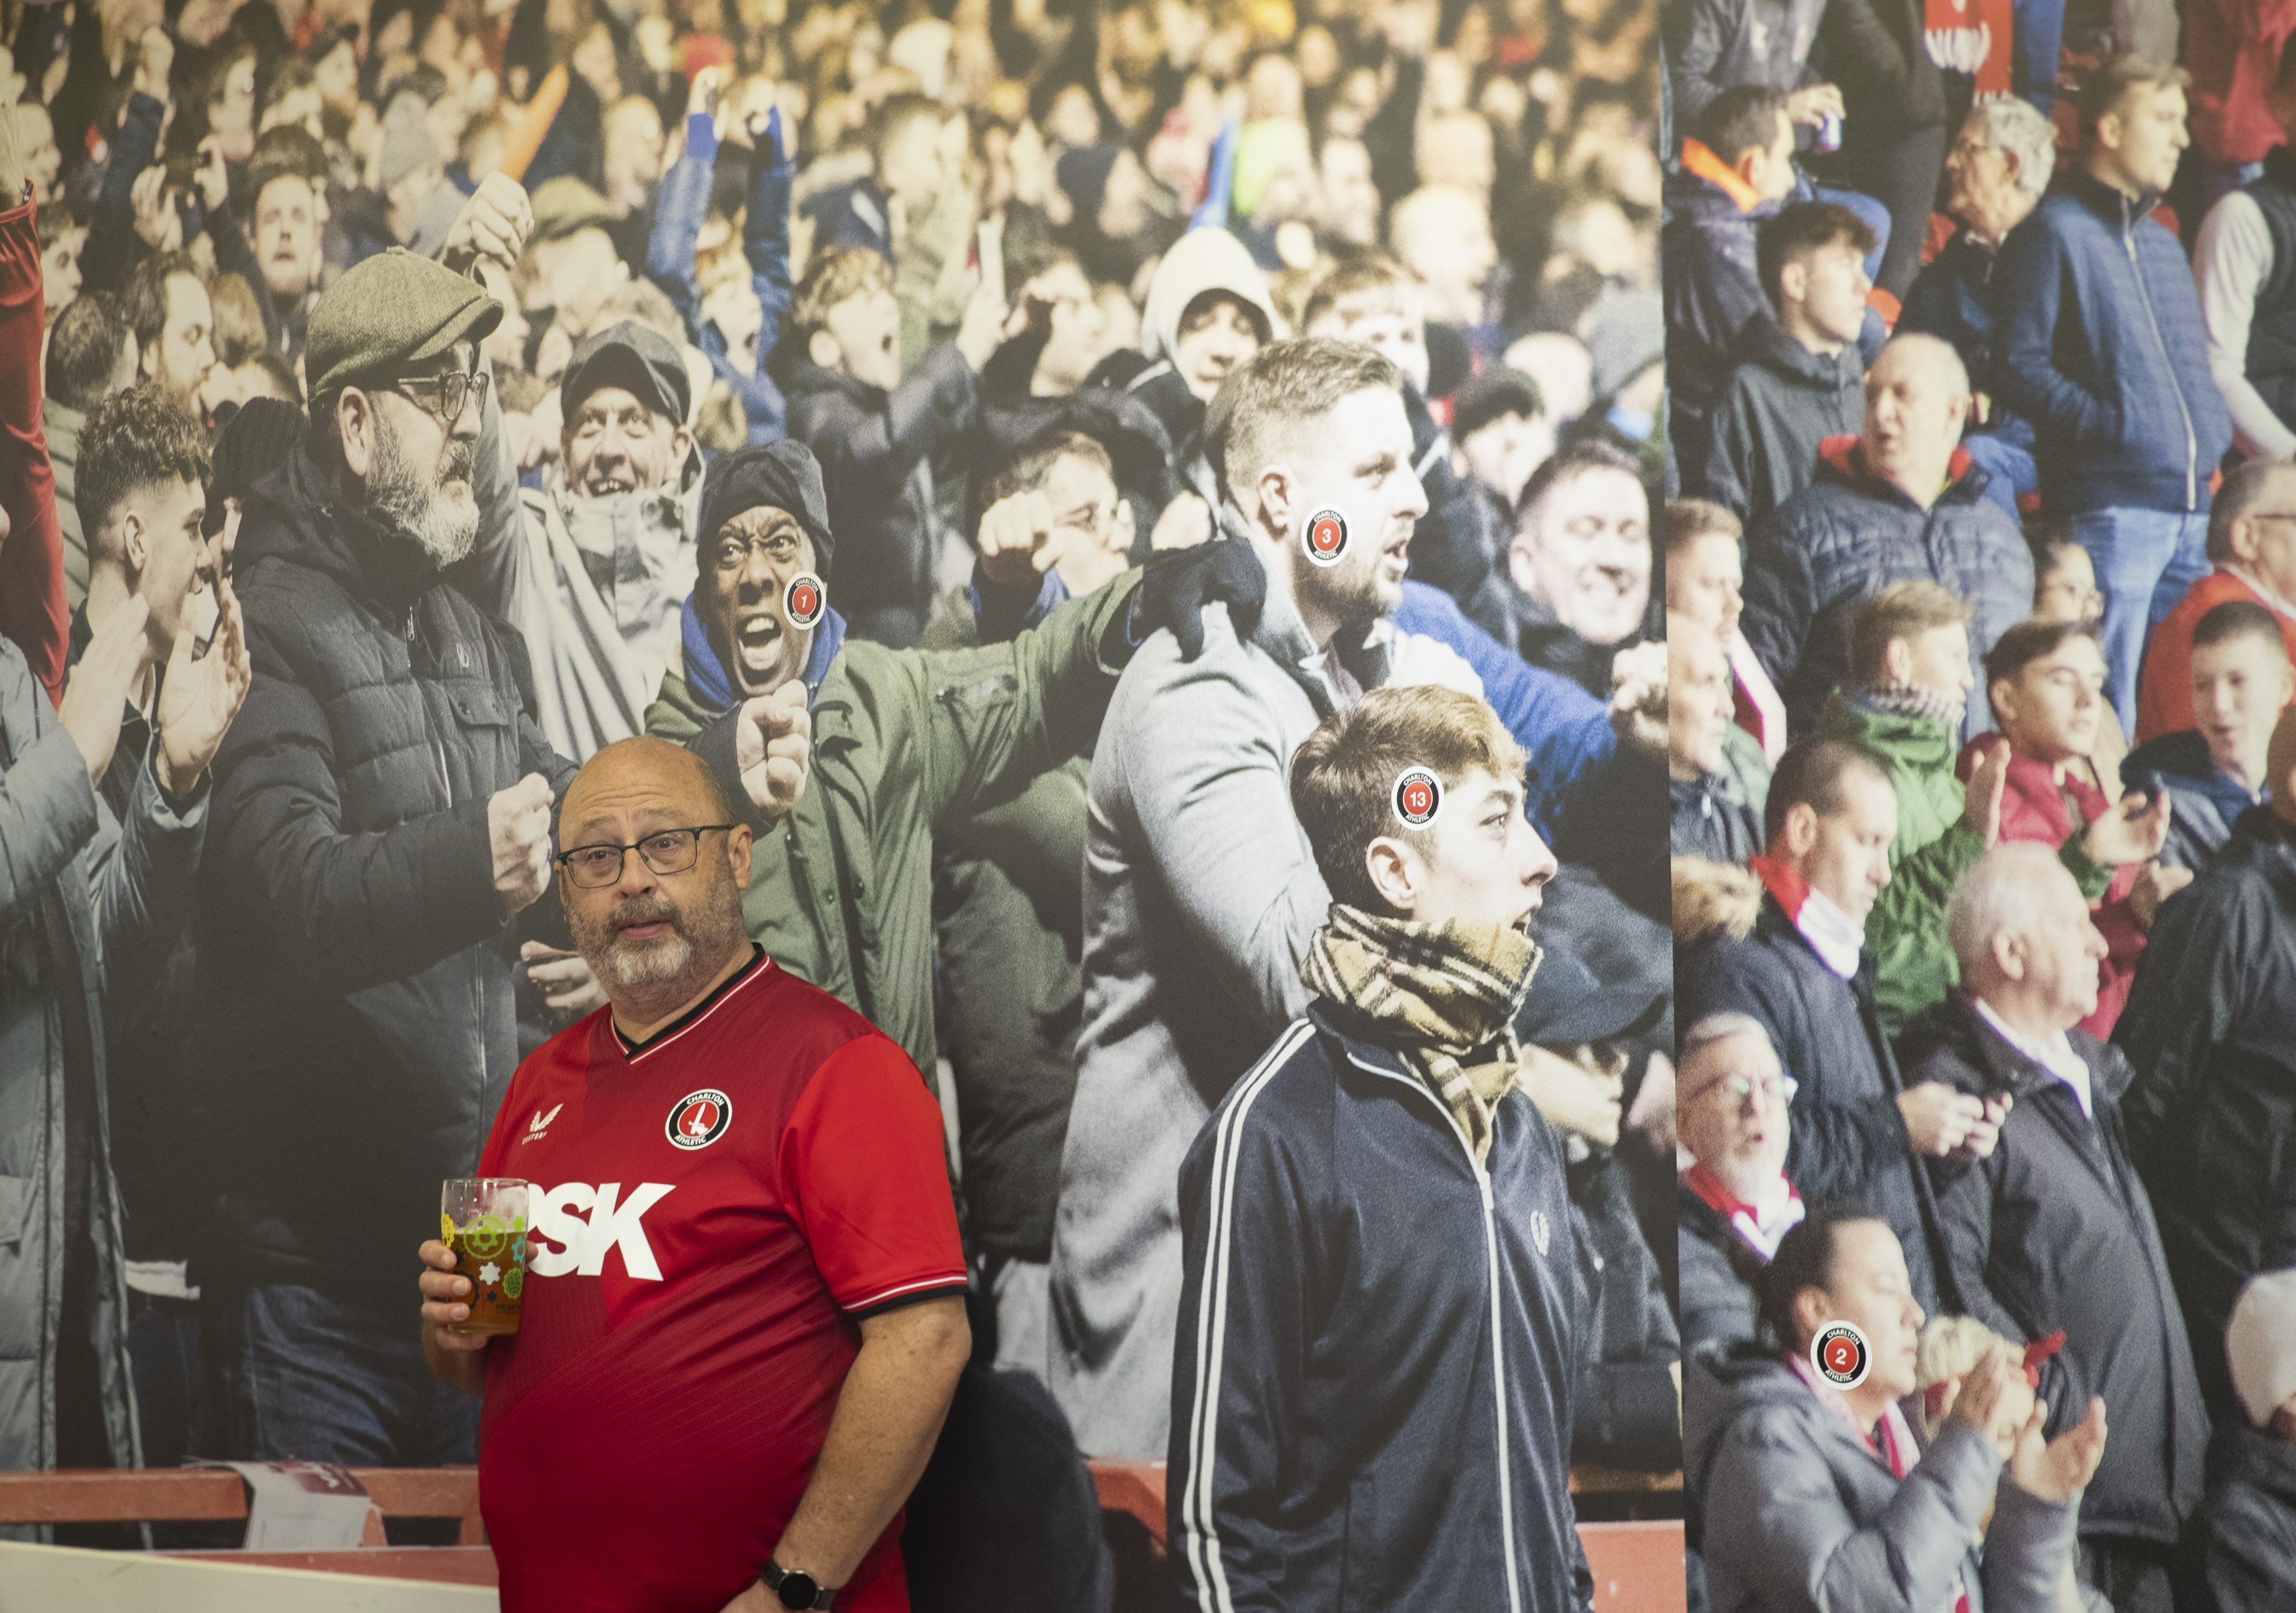 A supporter with his free beer